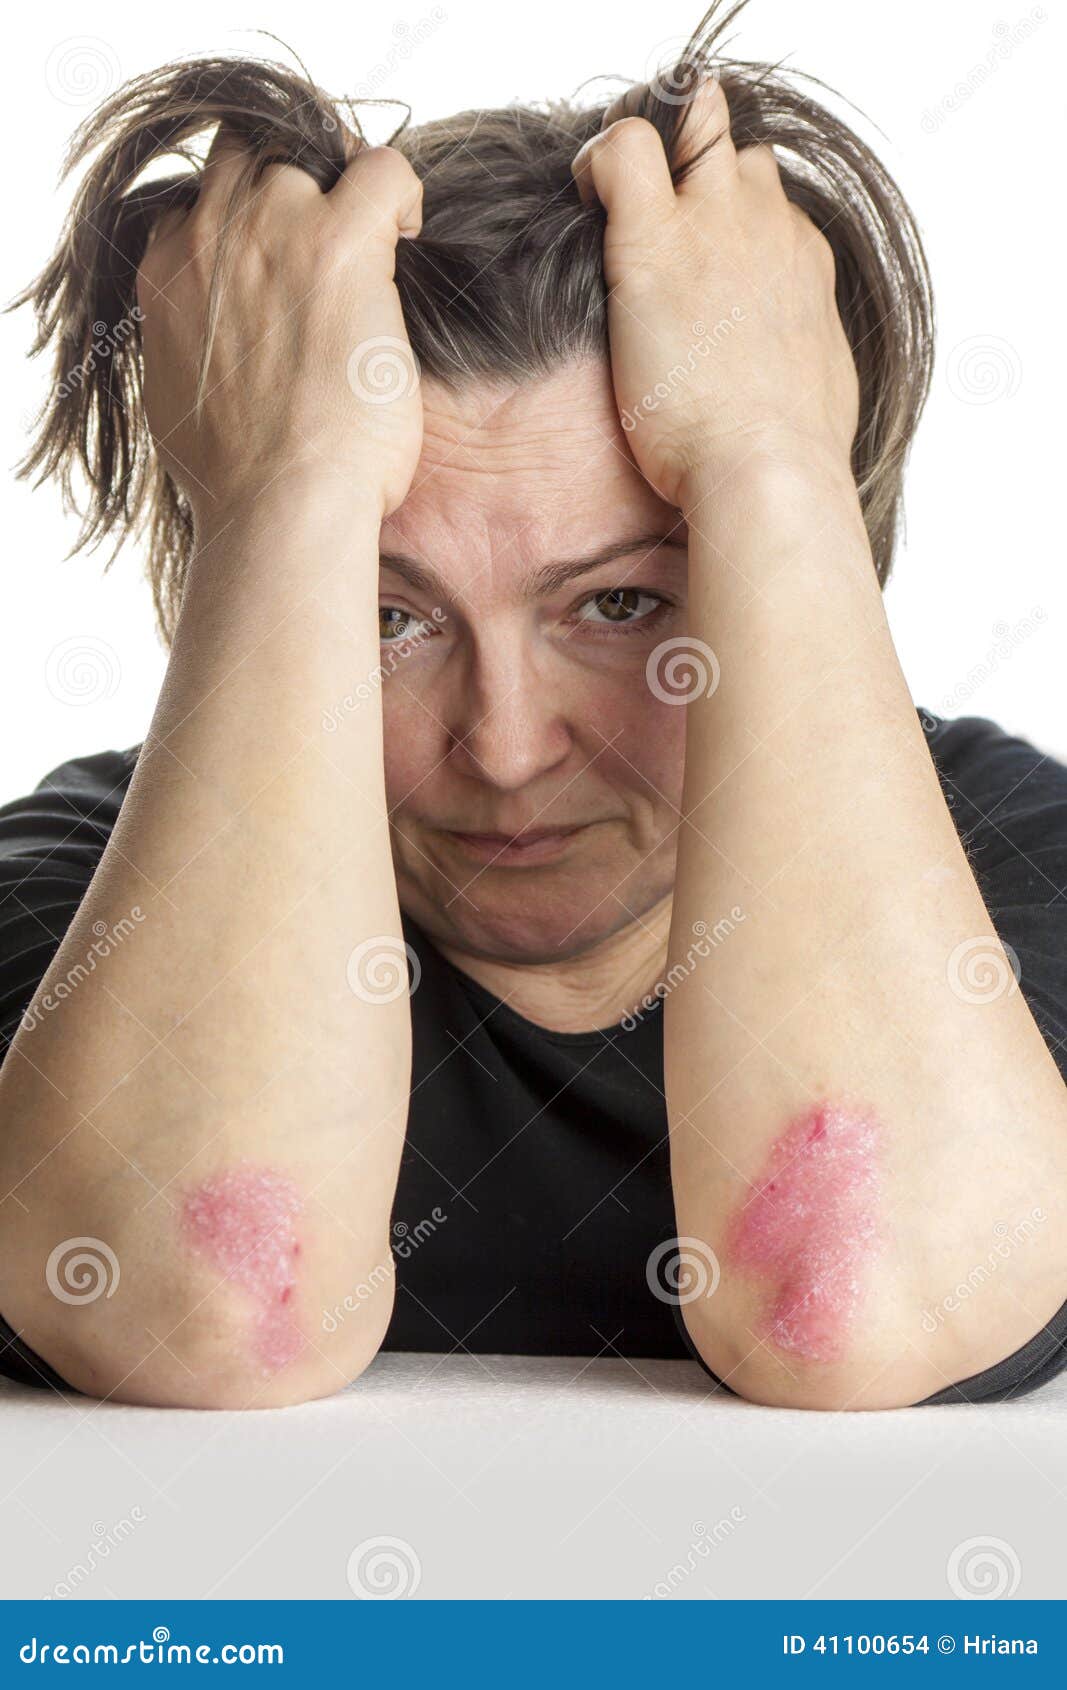 woman with psoriasis